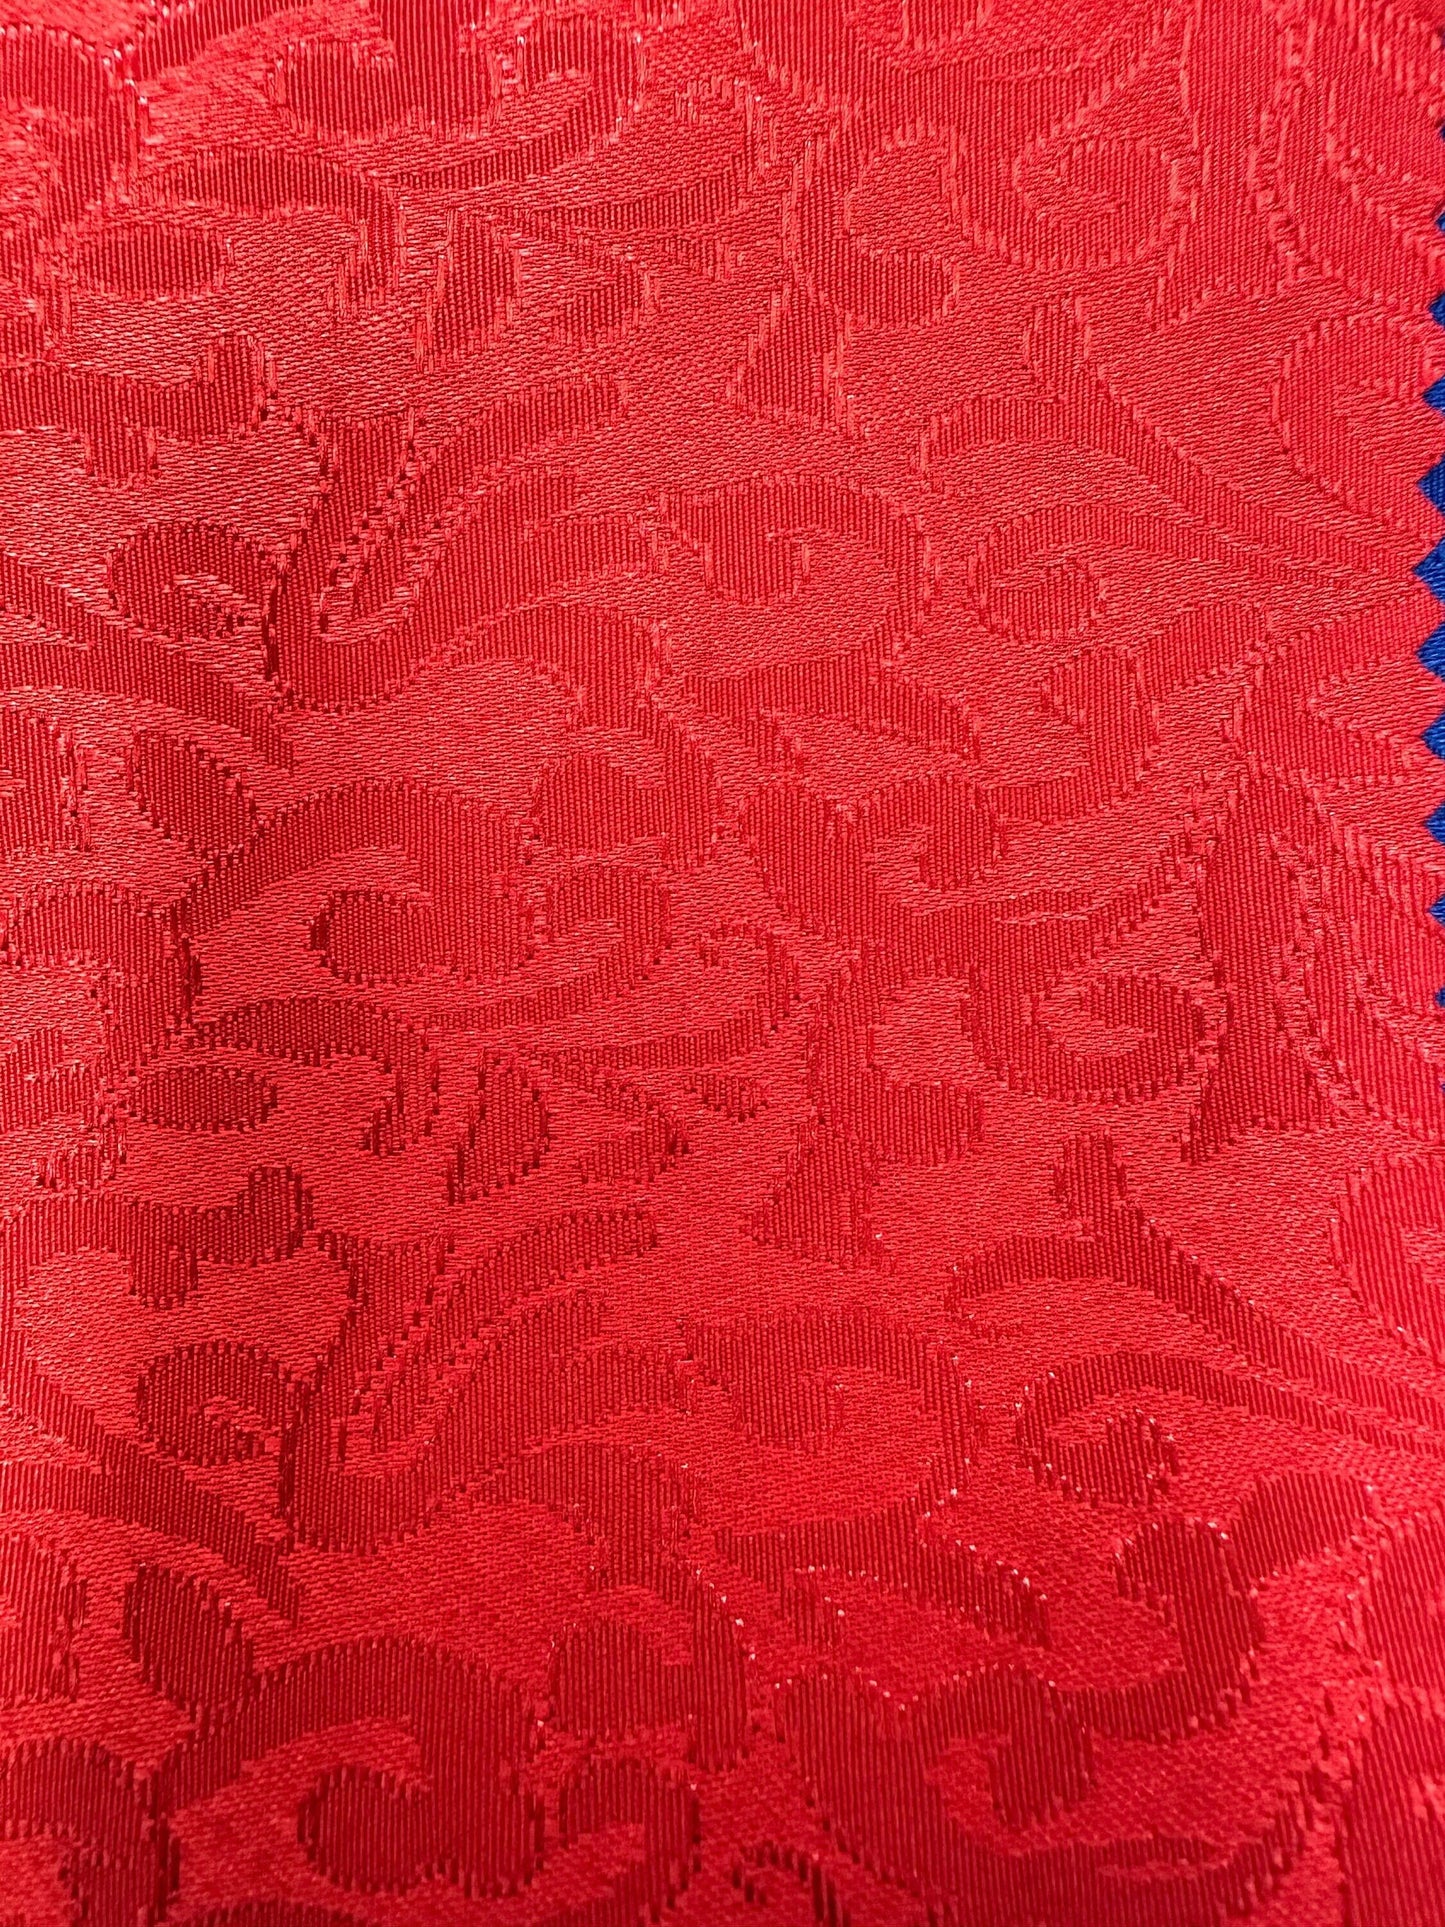 RED Floral Brocade Fabric (60 in.) Sold By The Yard